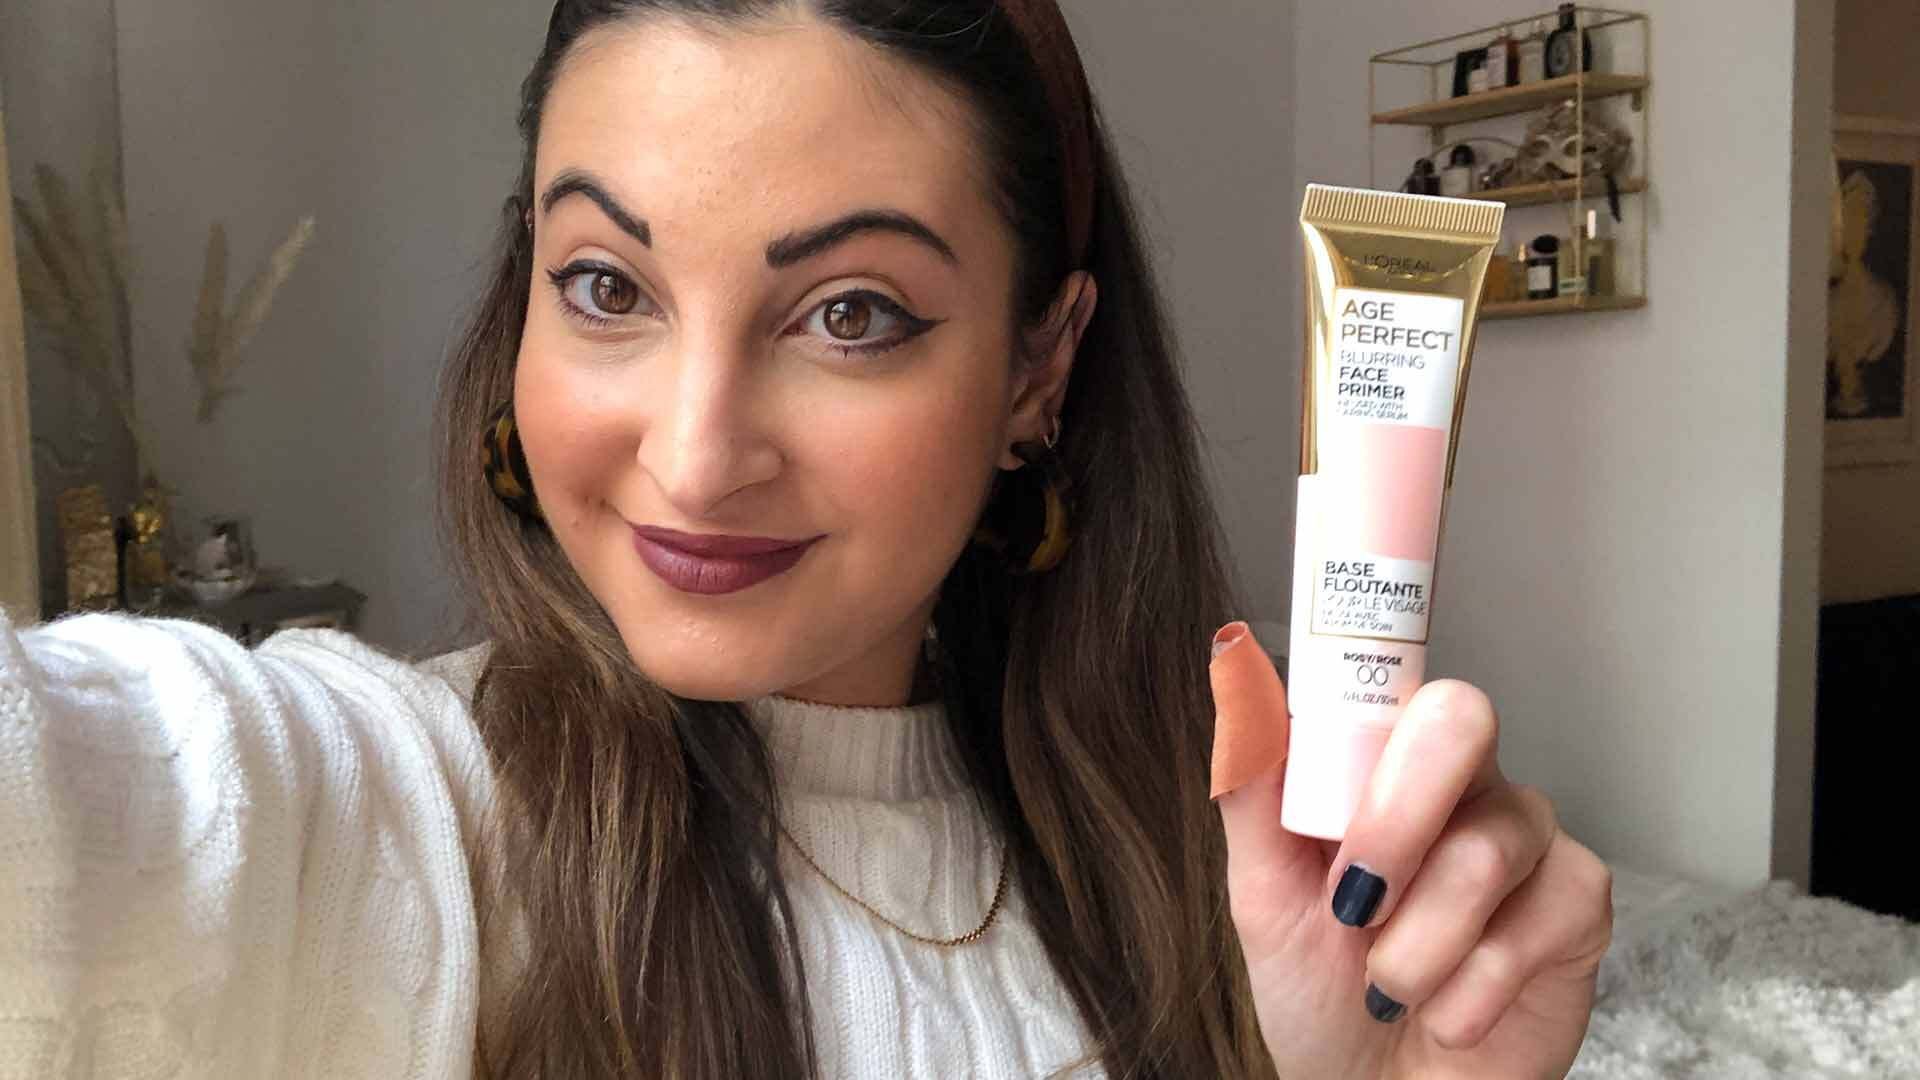 https://www.lorealparisusa.com/-/media/project/loreal/brand-sites/oap/americas/us/beauty-magazine/2021/february/2-10/loreal-paris-age-perfect-blurring-face-primer-review/lop-blurring-primer-i-tried-it-hero-new-bmag.jpg